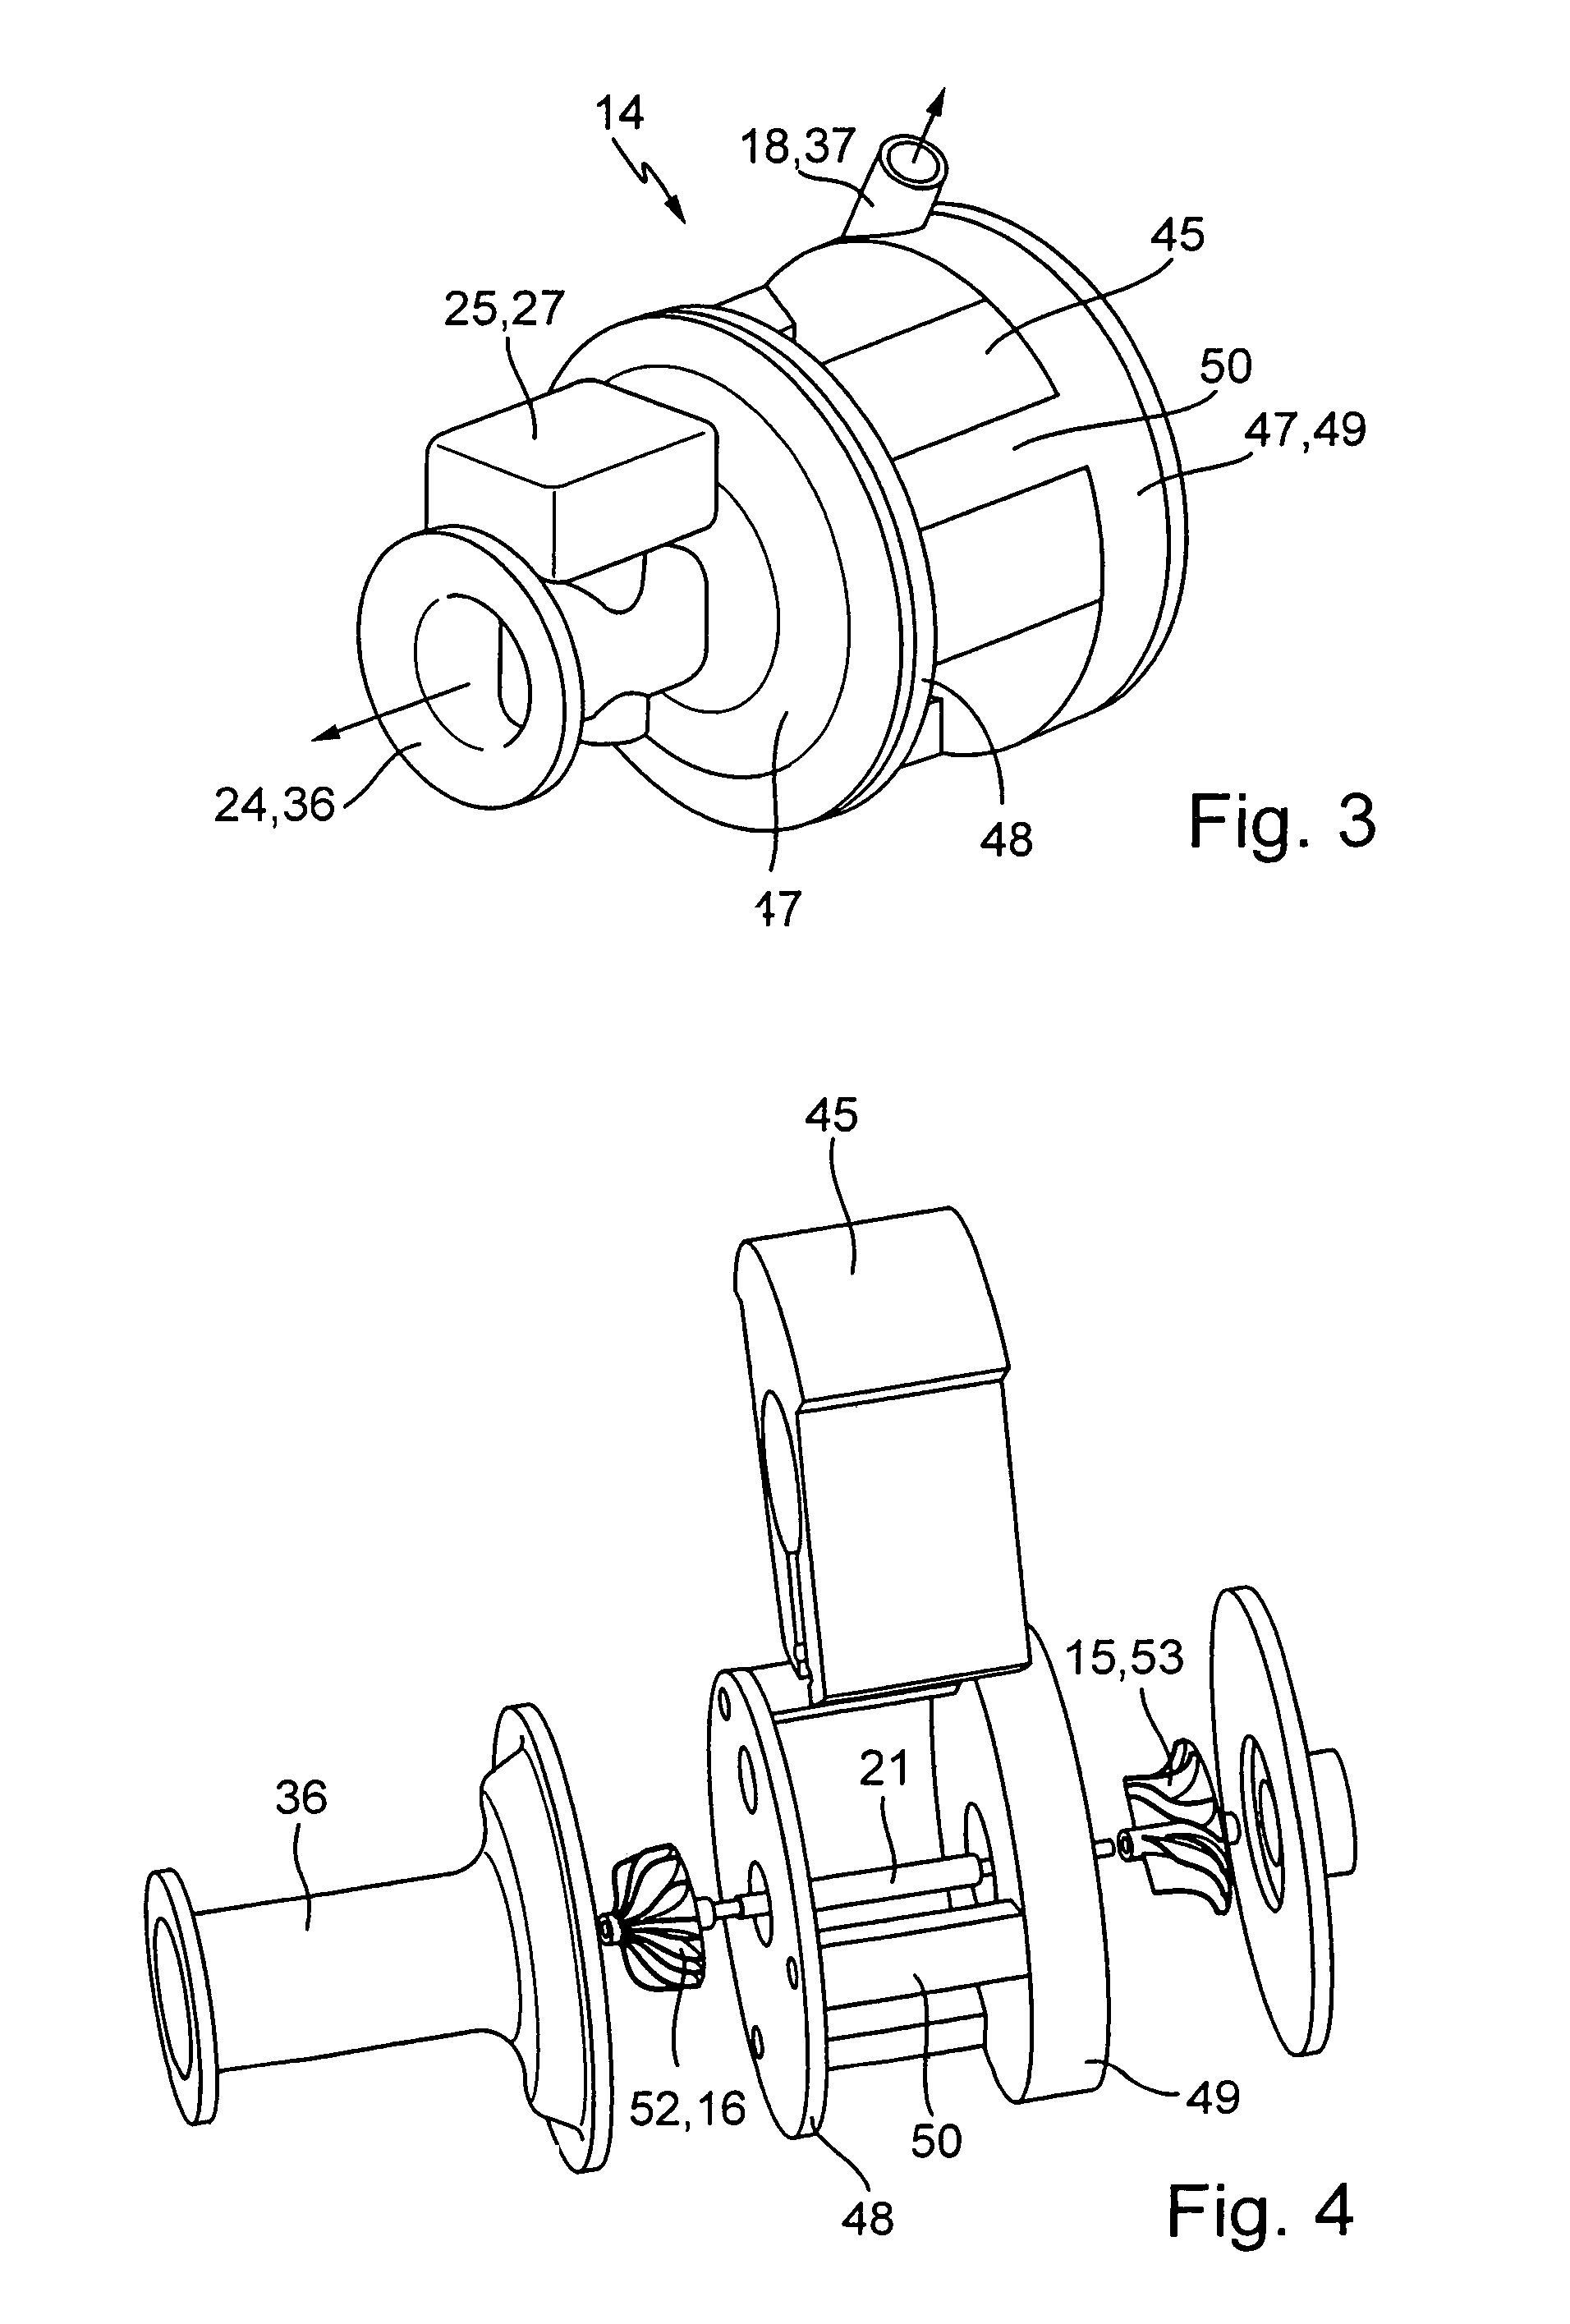 Air supply device for an internal combustion engine